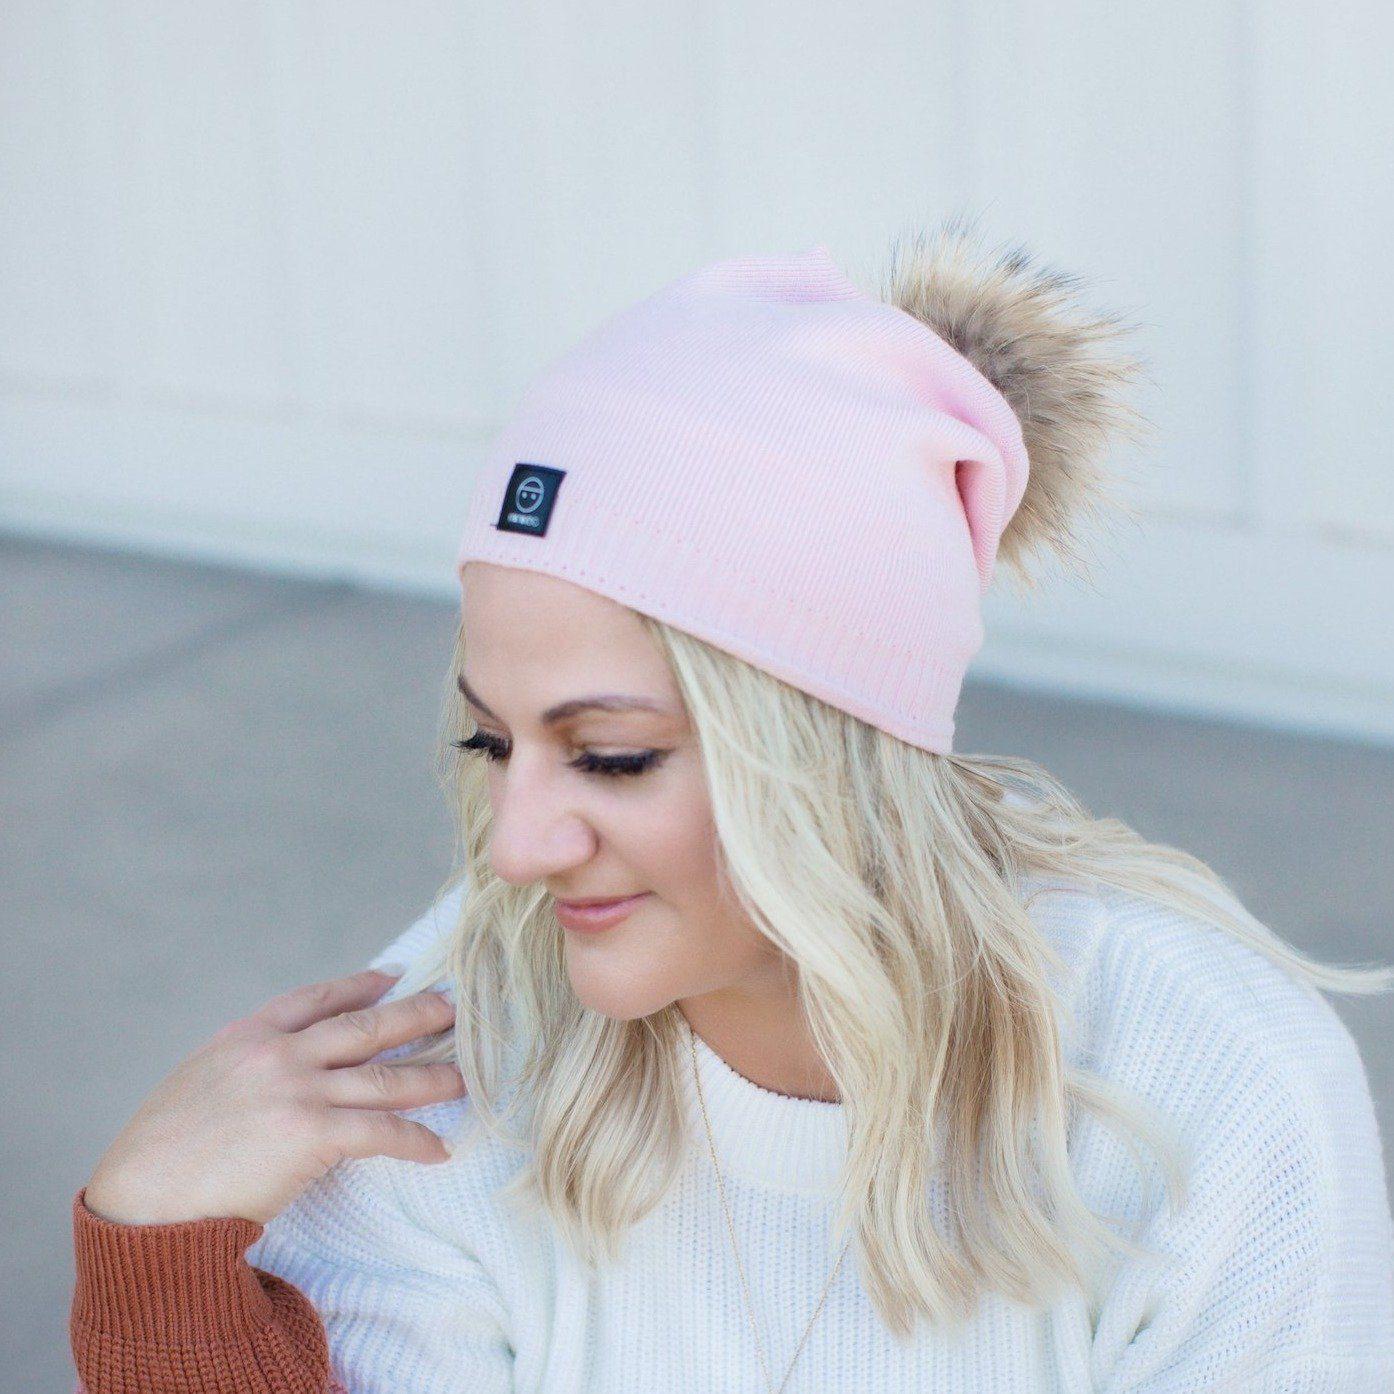 Pink Angora Slouchy Beanie with Large Snap On Pom Pom-Winter Beanies-Mix & Match baby beanie winter hat snap on removable pompom single or double by MKS Miminoo Arizona USA